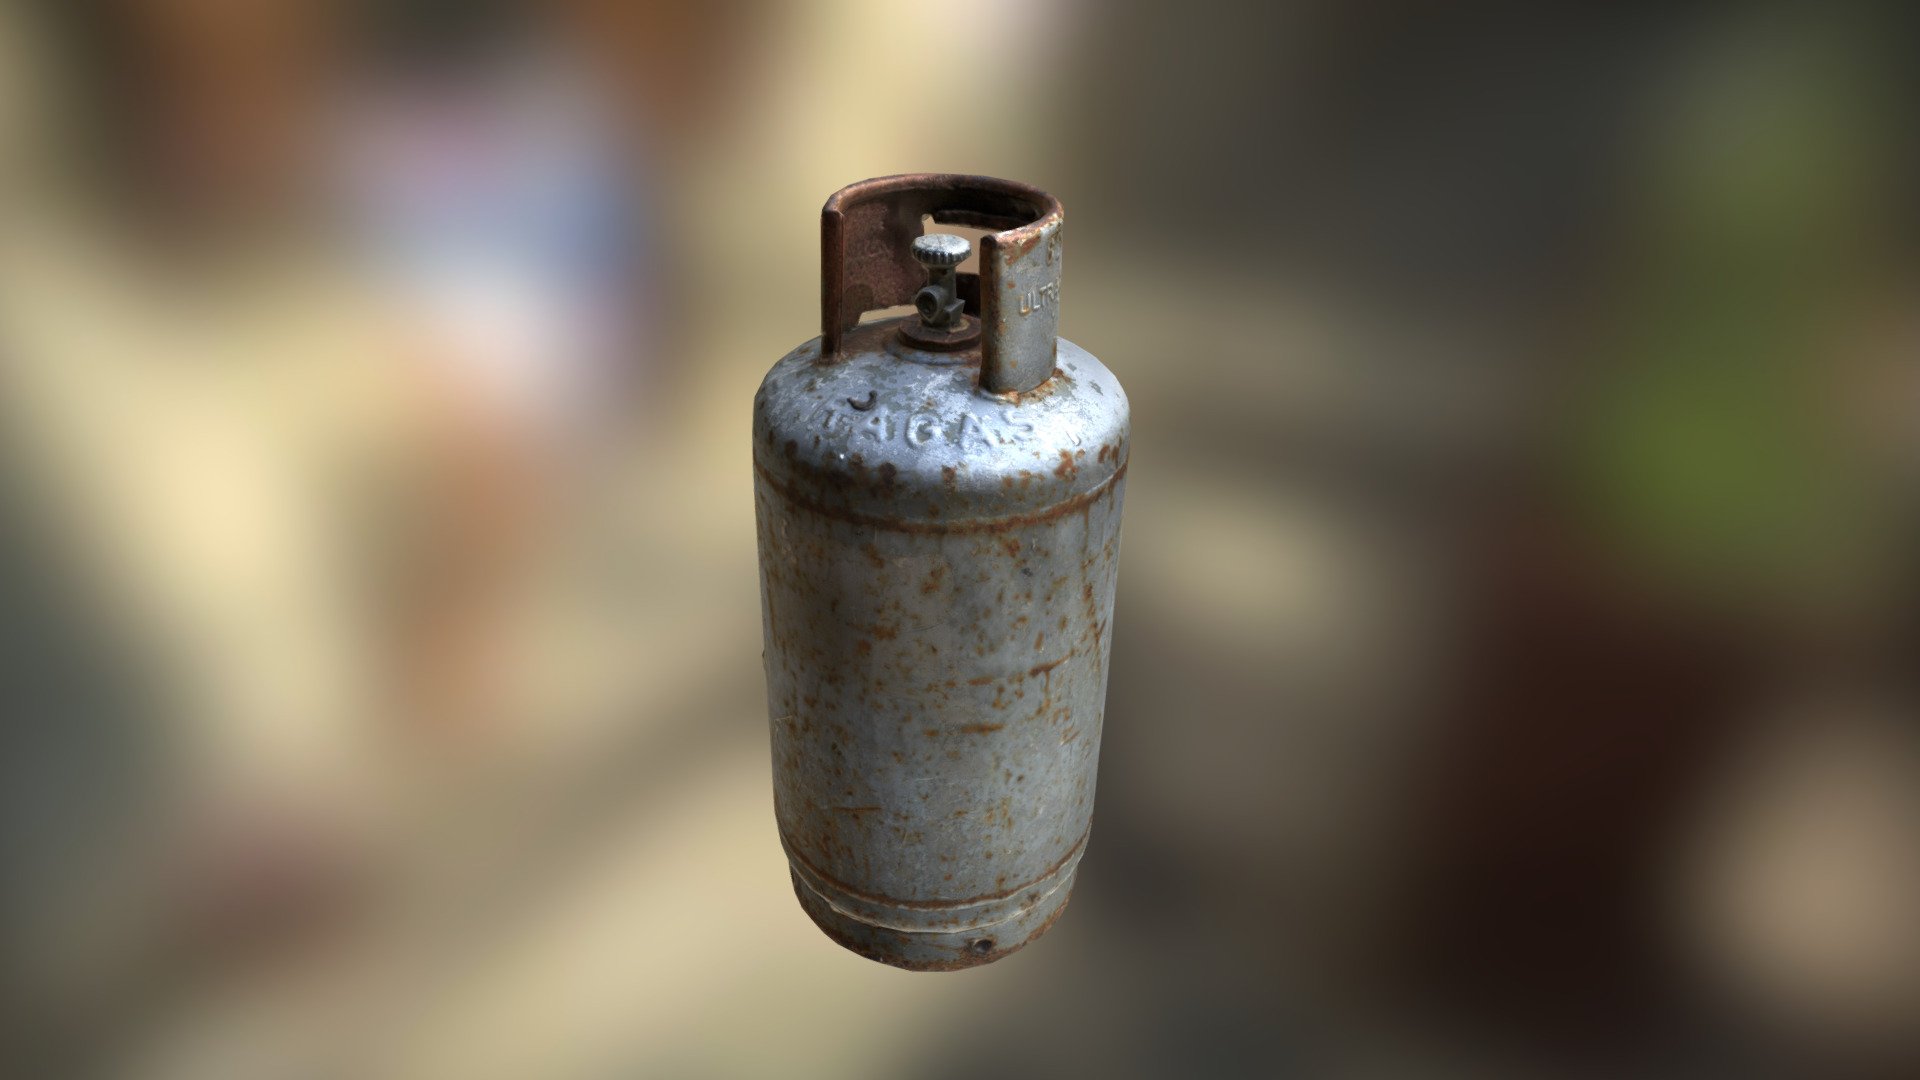 Gas Cylinder/Bottle photoscanned model. 360 Degrees, decimated, cleaned, UV'ed &amp; PBR Textured.
Texture Set


2048x2048 / PNG
Albedo (Diffuse) / Roughness / Metallic / Normal / Ambient Occlusion

Vertex Count


1.2k Vertices 

Additional information


Real World Scale
Z up
Free of all legal issues as all branding and labels are adjusted.

Additional files


None

If you need any support, assistance or feedback, you can comment below or mail me and I will respond as quickly as possible.
High Poly Scan and Texture available upon request. 

Check out my other models and photoscans by following the links below.

Contact: hello@notoir.xyz 

More: https://notoir.xyz/featured-links/

Follow me on:
Instagram
Twitter
Artstation - Gas Cylinder, Bottle / Photoscan / Low Poly PBR - Buy Royalty Free 3D model by NOTOIR.XYZ (@Notoir) 3d model